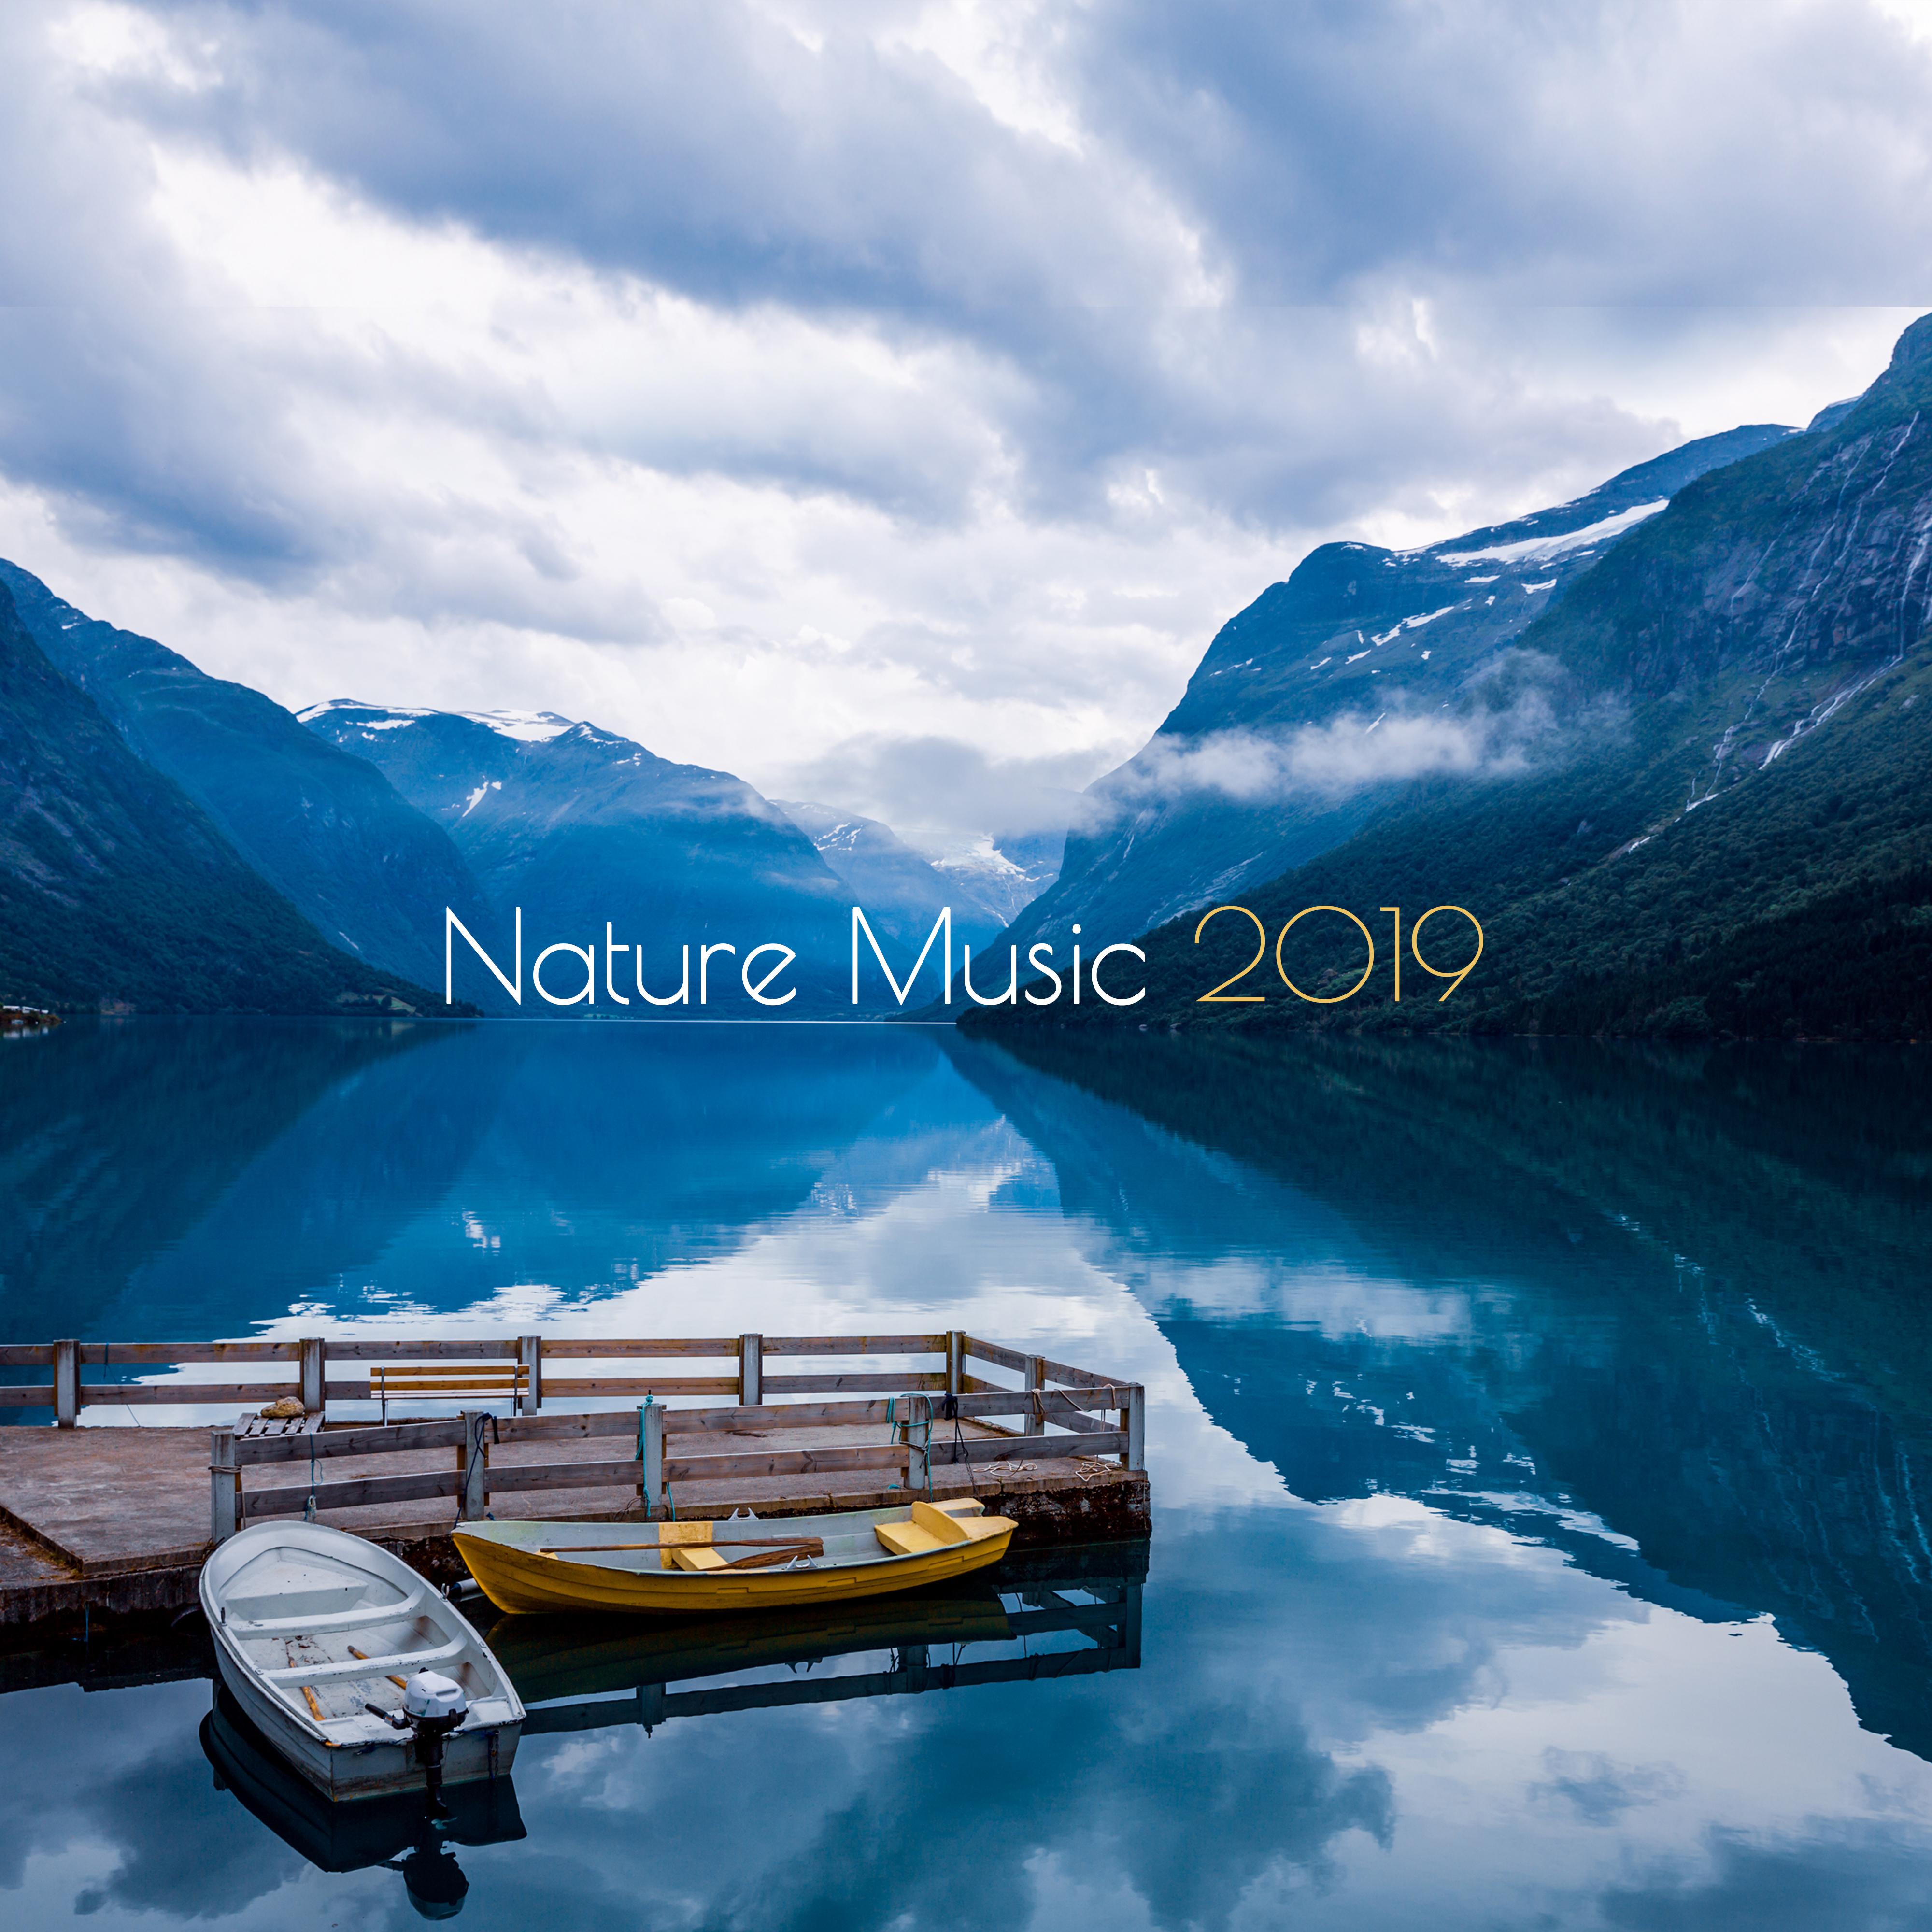 Nature Music 2019: Relaxation Music to Calm Down, Deep Harmony, Zen, Lounge, Soothing Sounds Reduce Stress, Sounds of Nature, Relief Music 2019